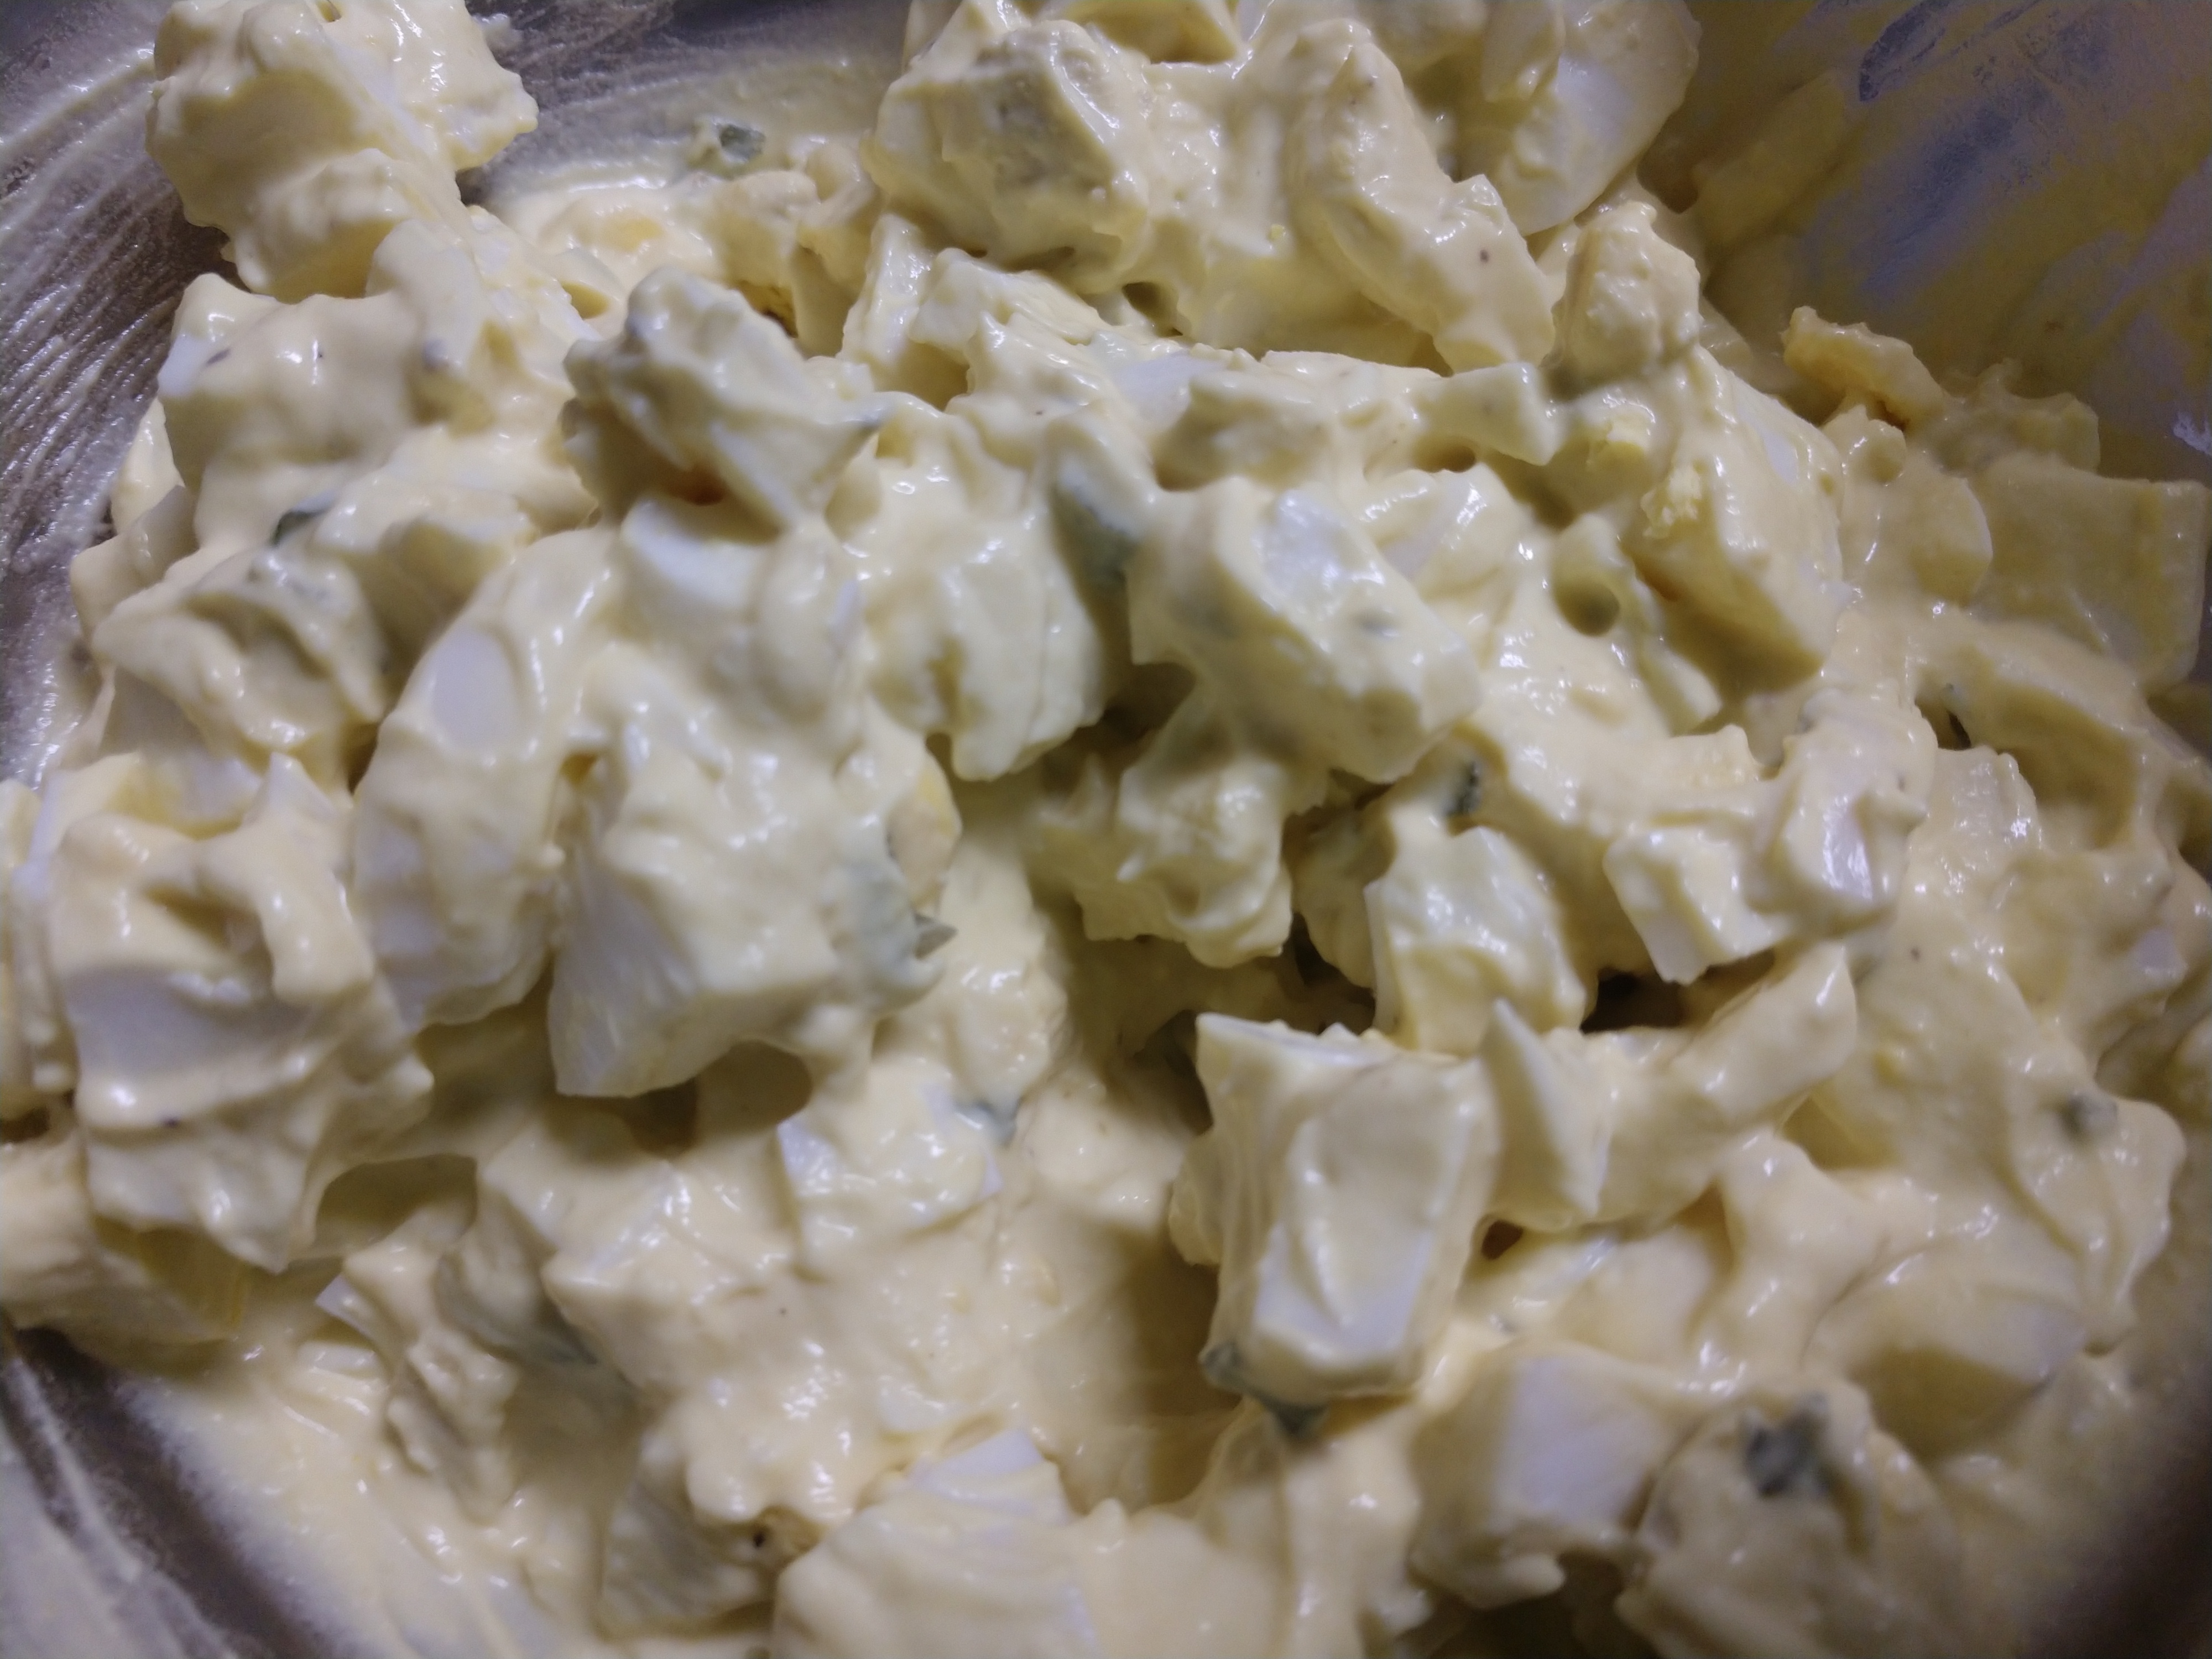 Delicious Egg Salad for Sandwiches day871@yahoo.com